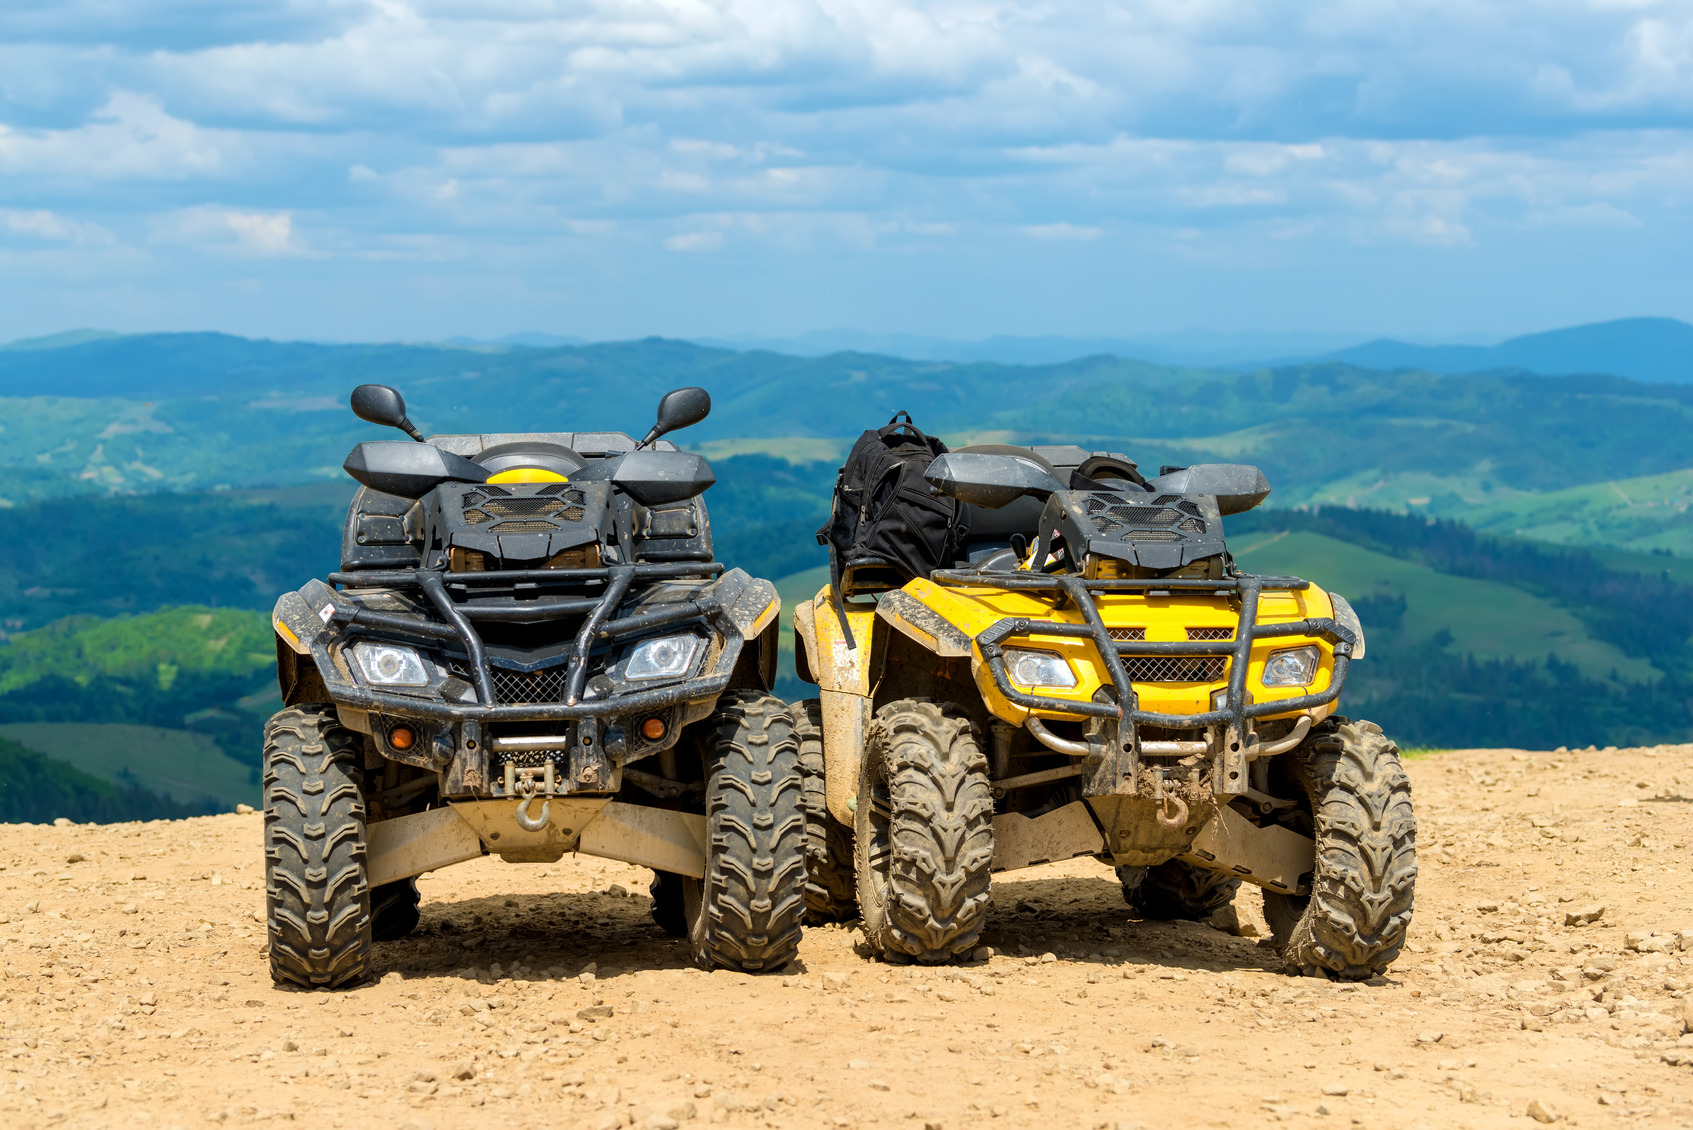 Can-Am Maverick X3 Roll Cages: Taking Your Off-Road Ride to the Max